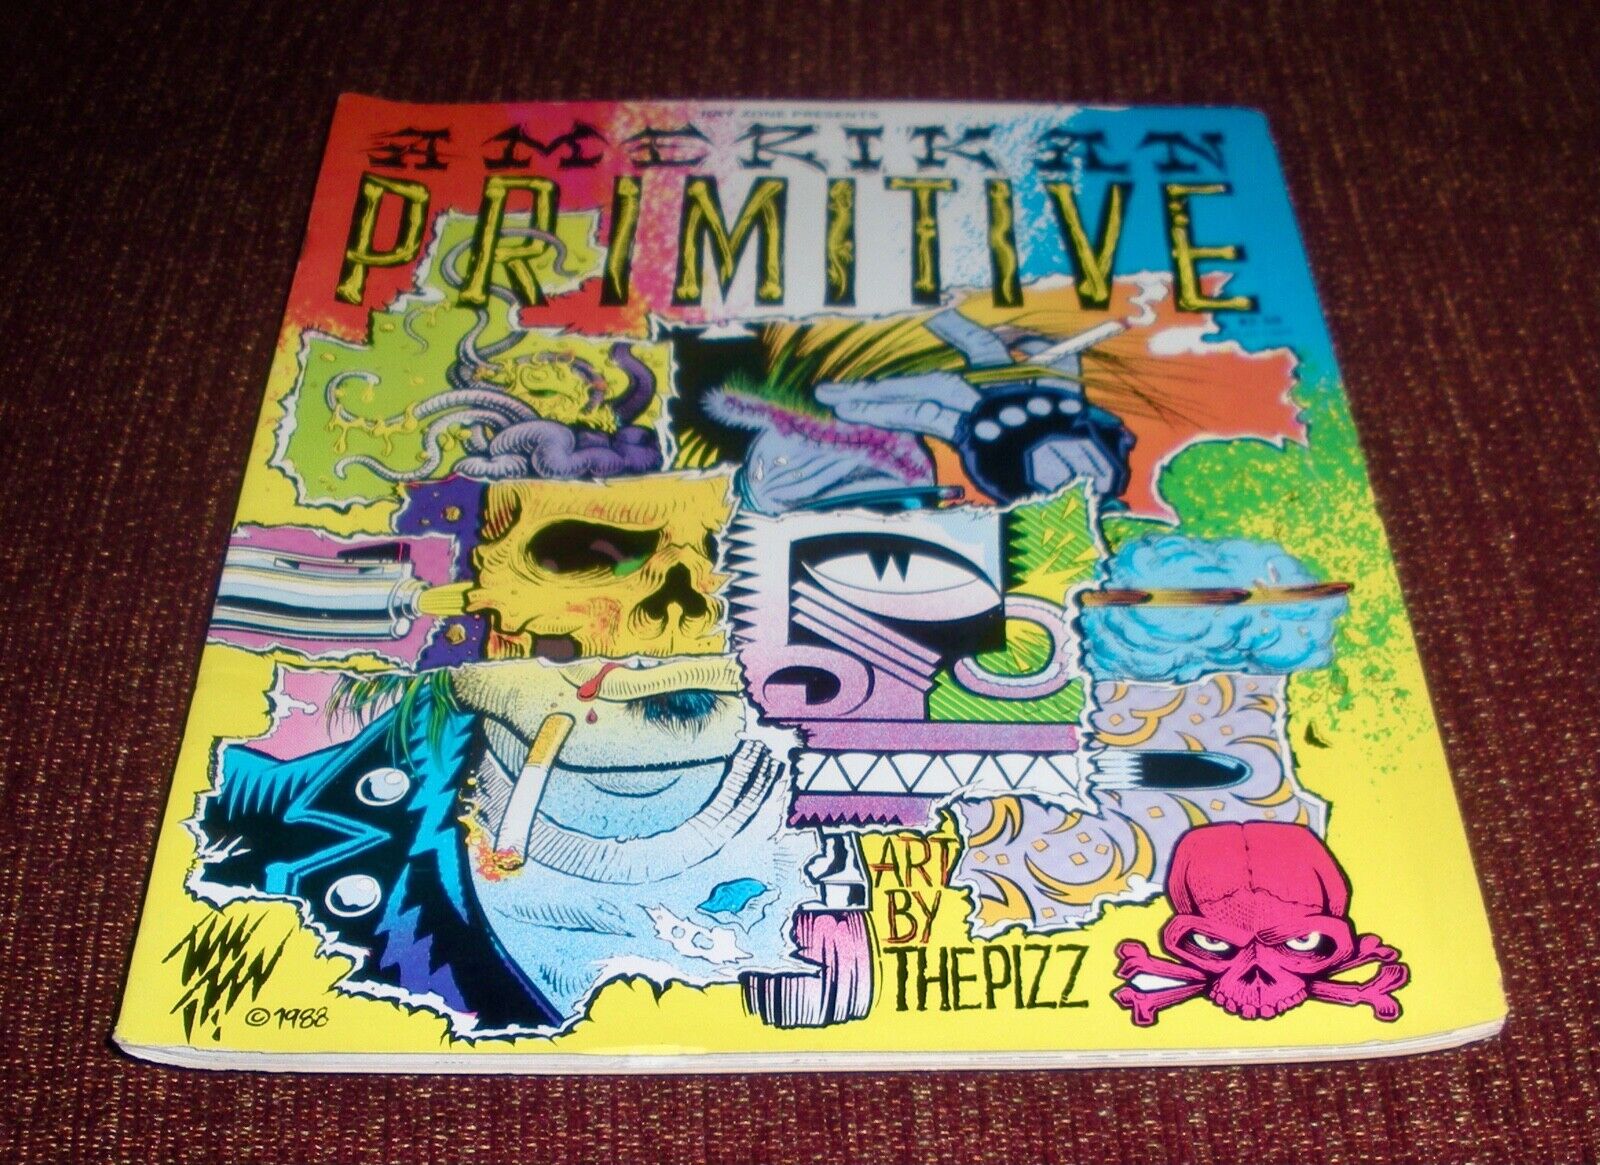 Amerikan Primitive Comic (1989) Art By The Pizz (Published by 3-D Zone)